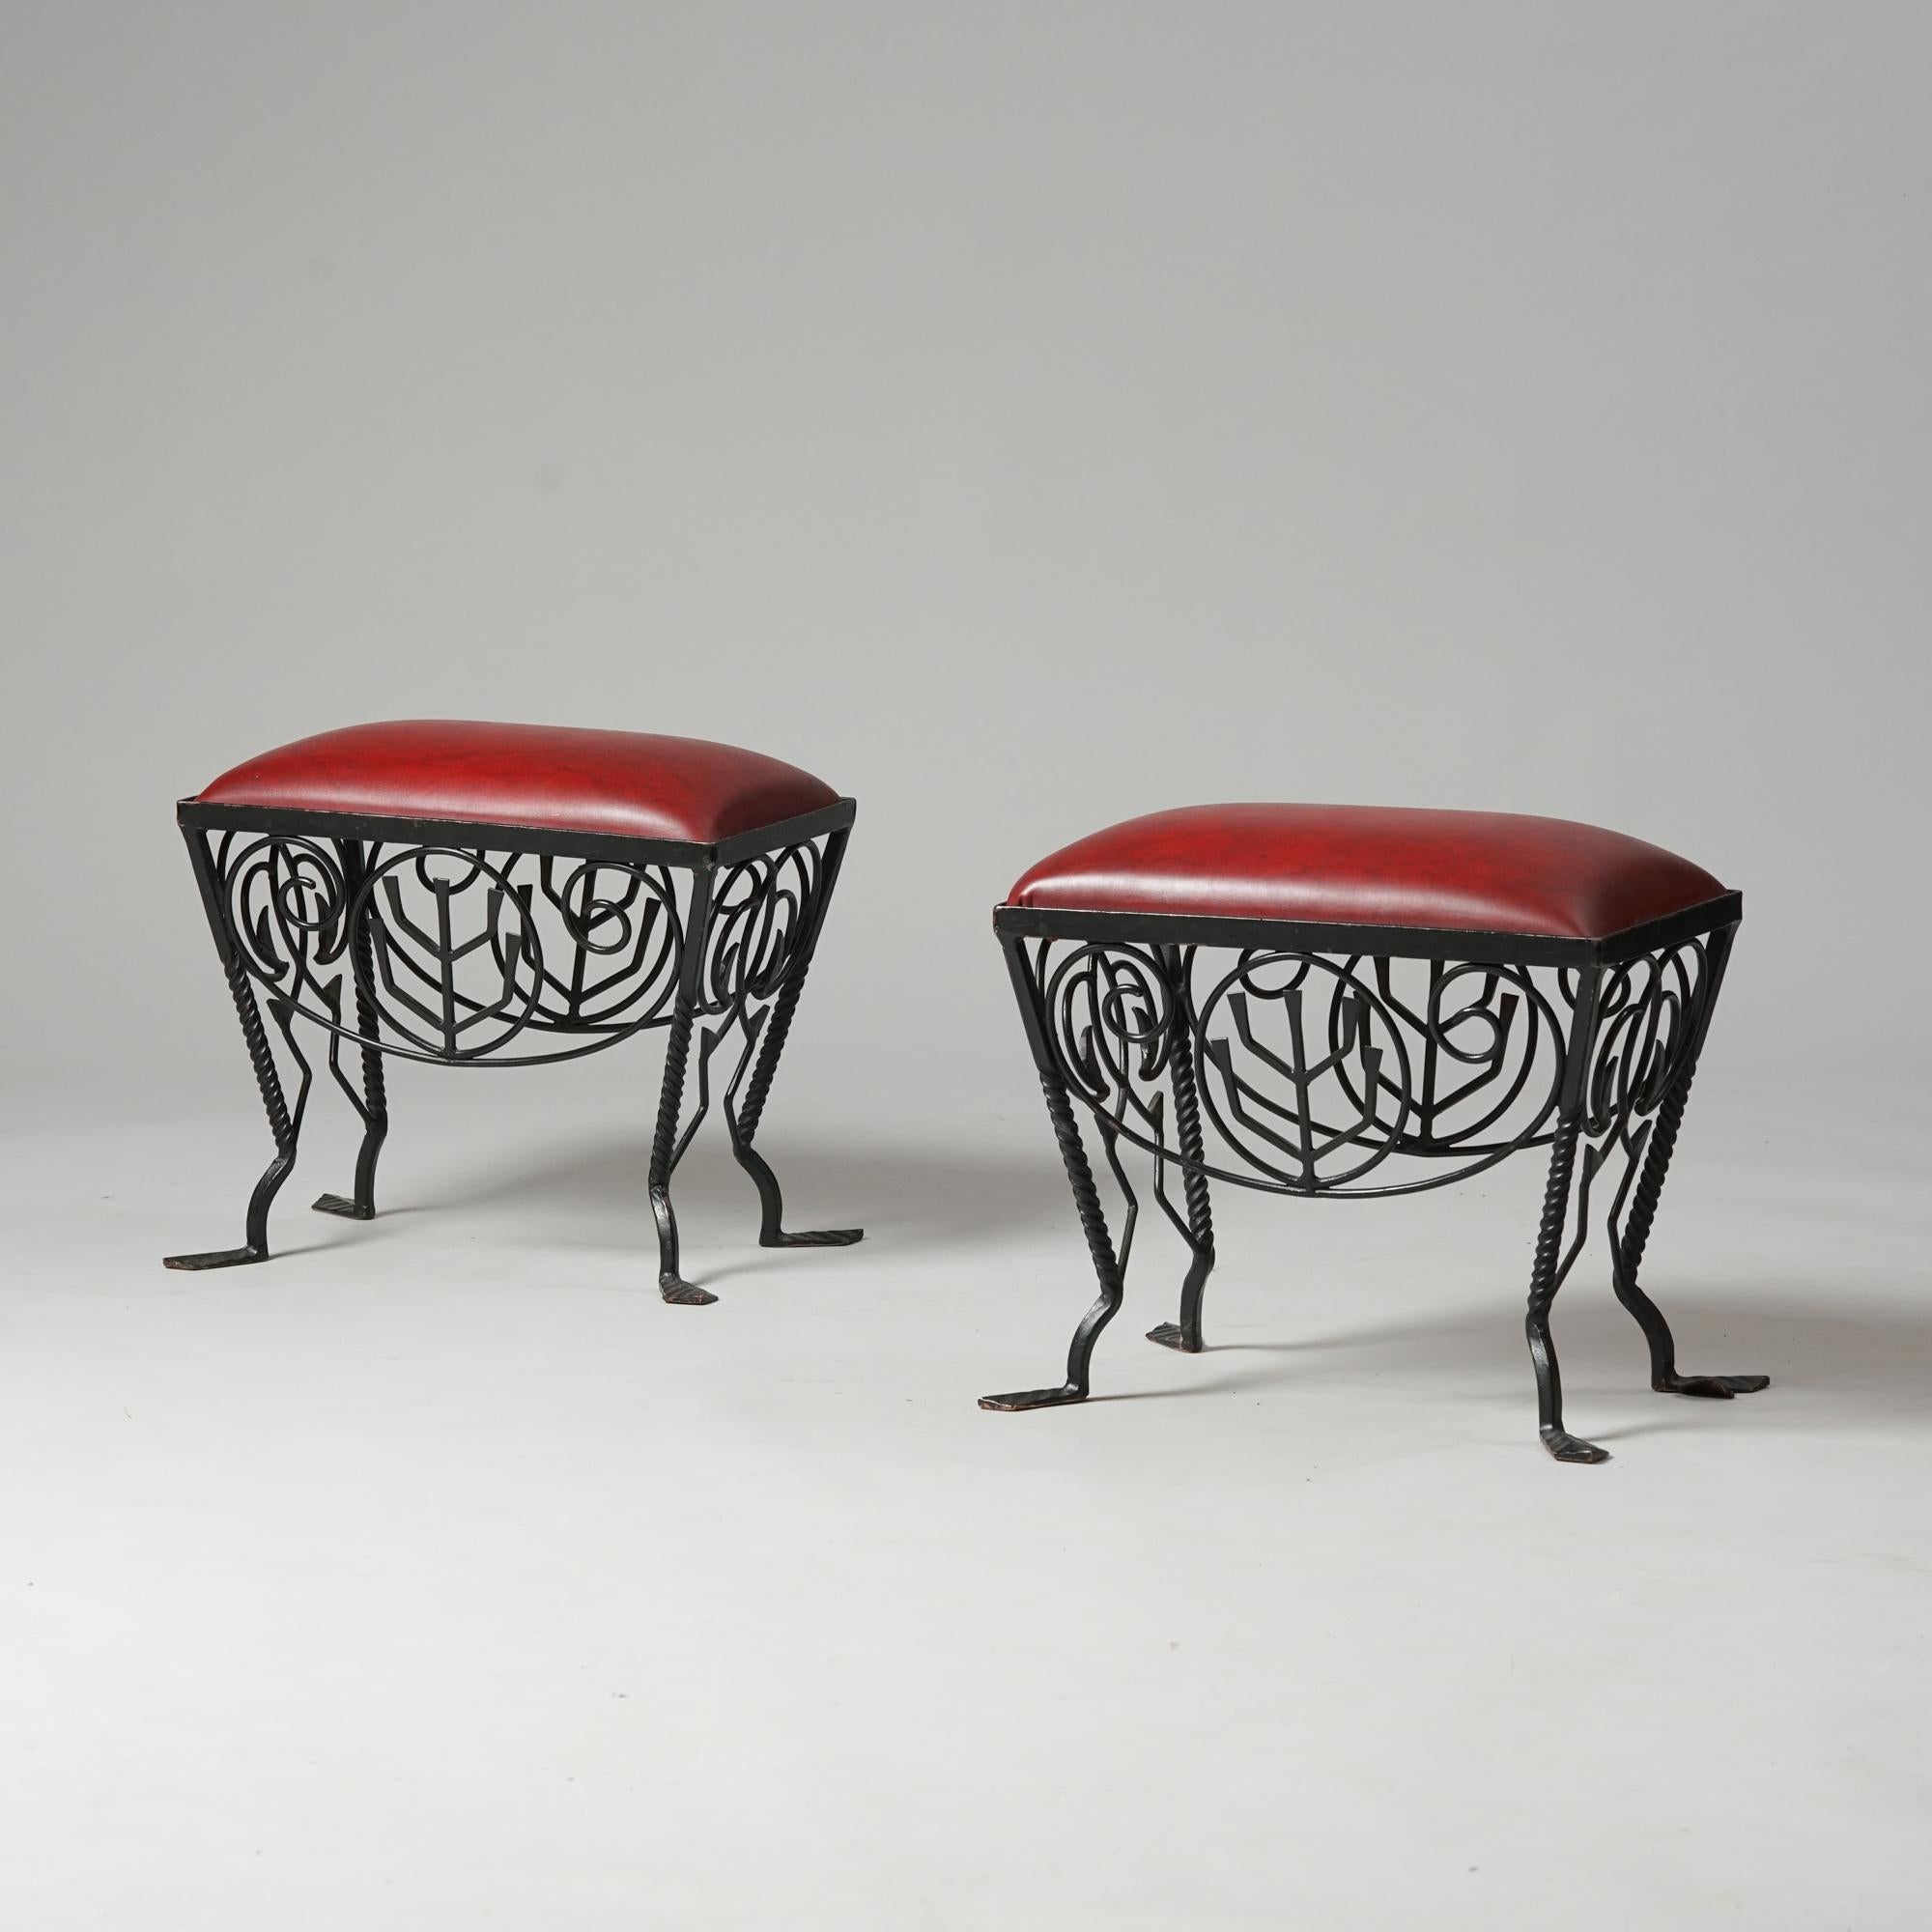 Exceedingly rare pair of stools by Taidetakomo Hakkarainen from the Early 20th Century. Iron with red imitation leather seat. Good vintage condition, minor patina consistent with age and use. The stools are sold together. 